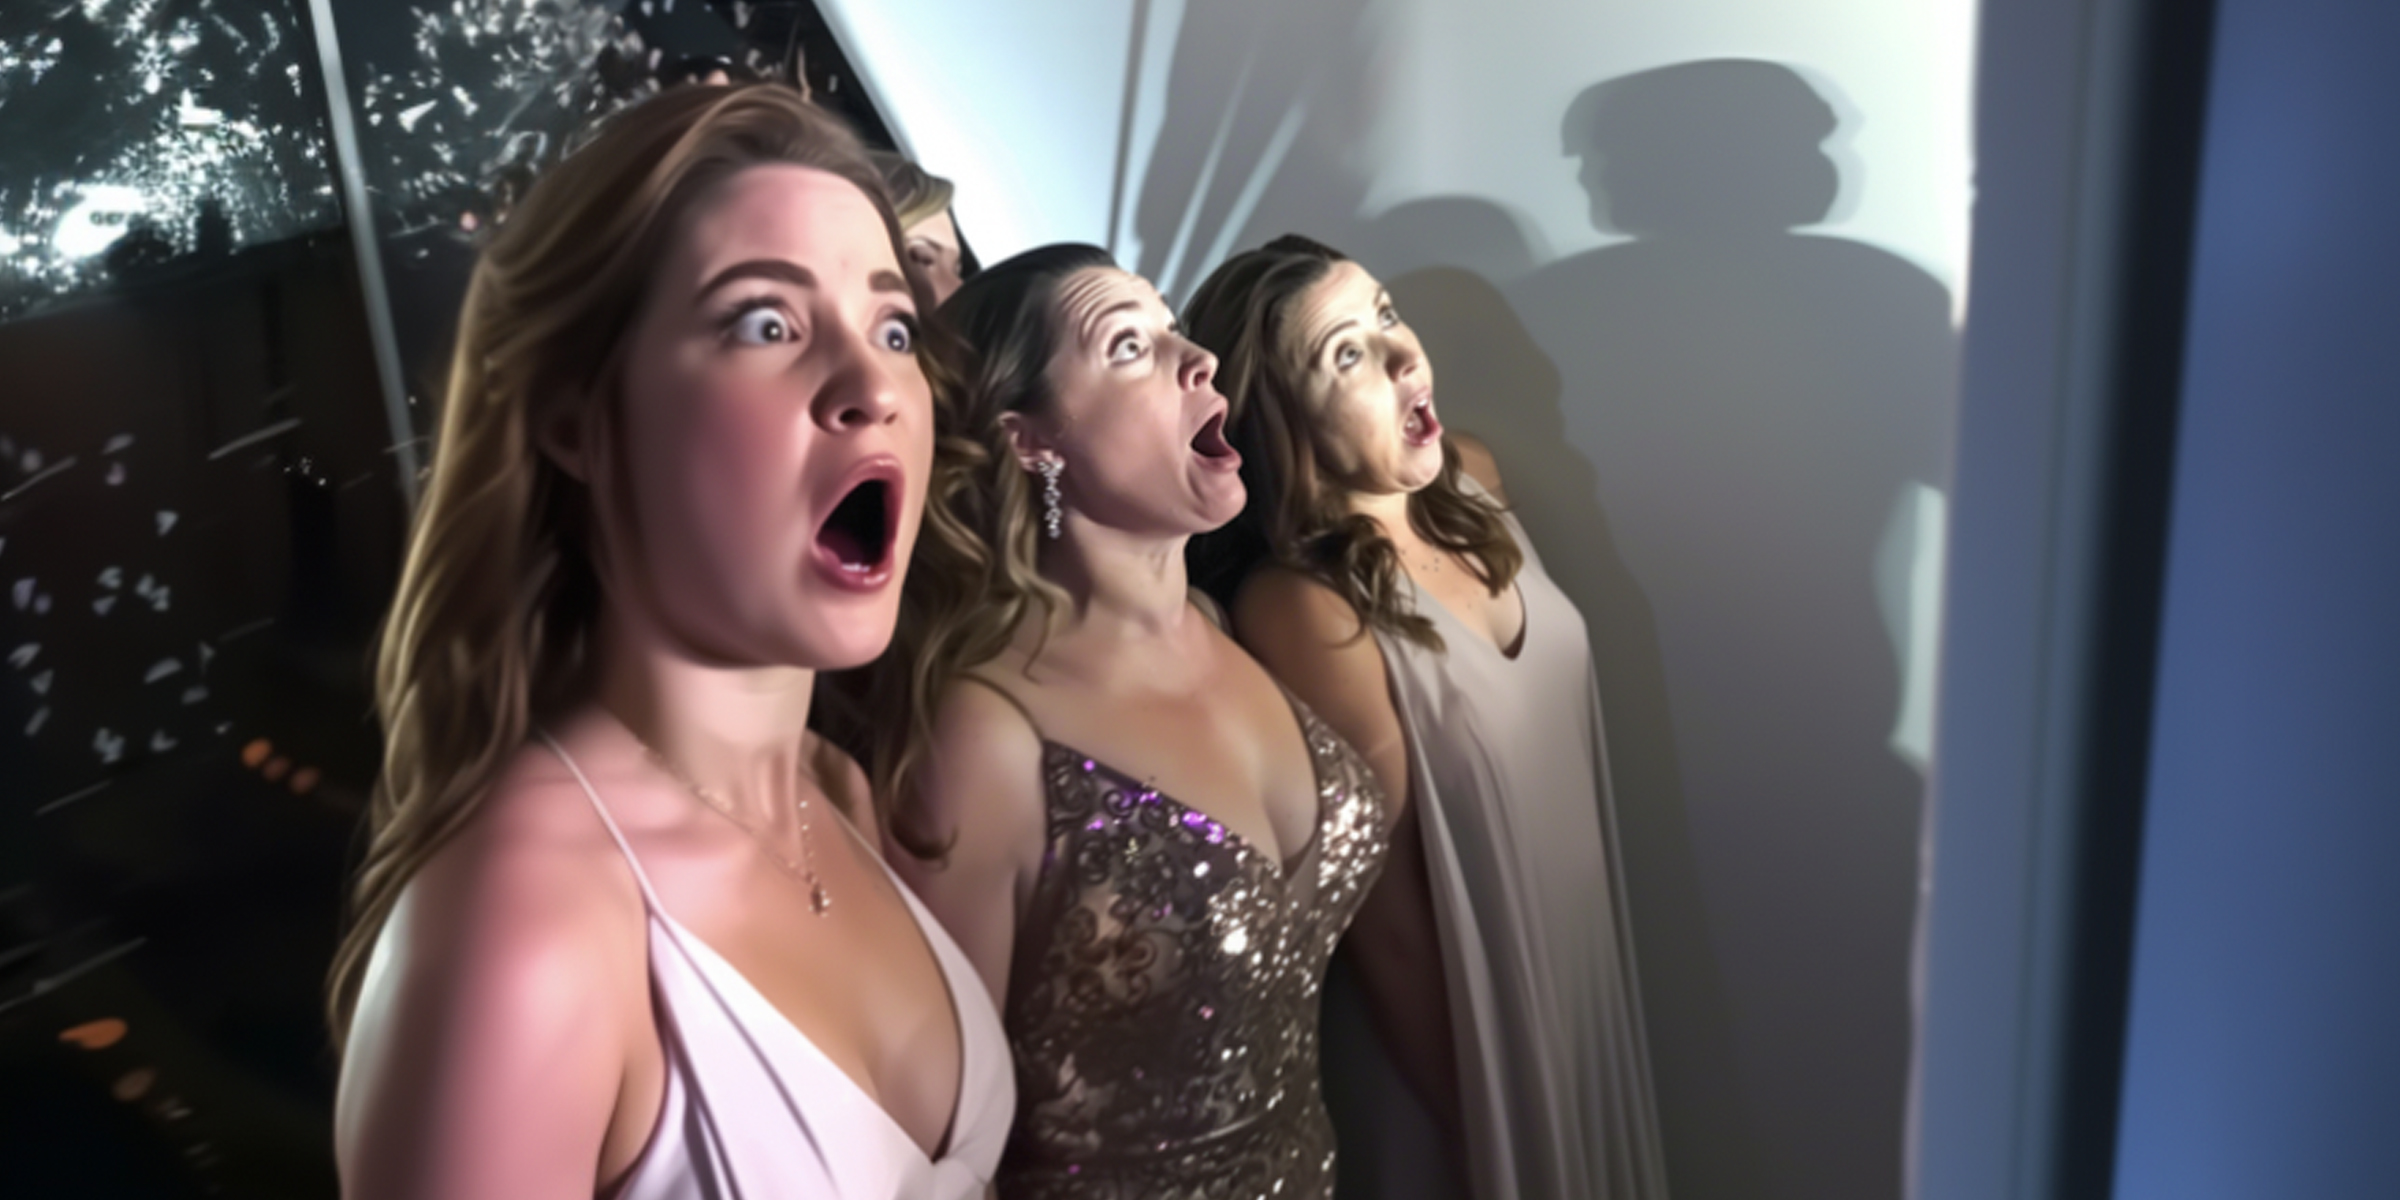 A group of shocked women | Source: AmoMama